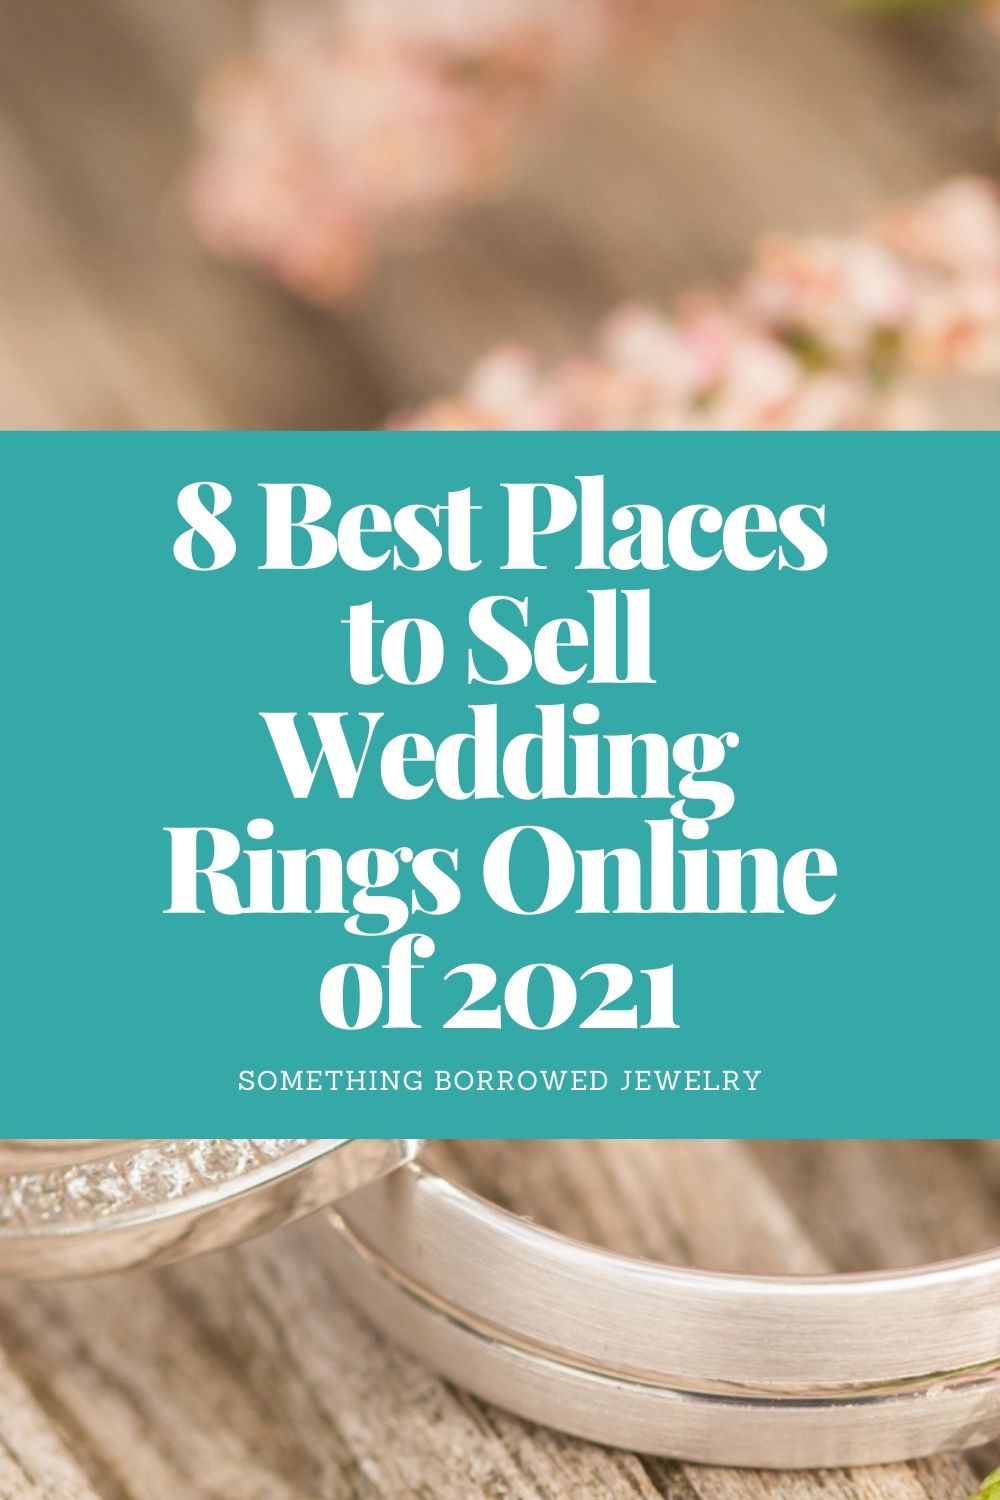 8 Best Places to Sell Wedding Rings Online of 2021 pin